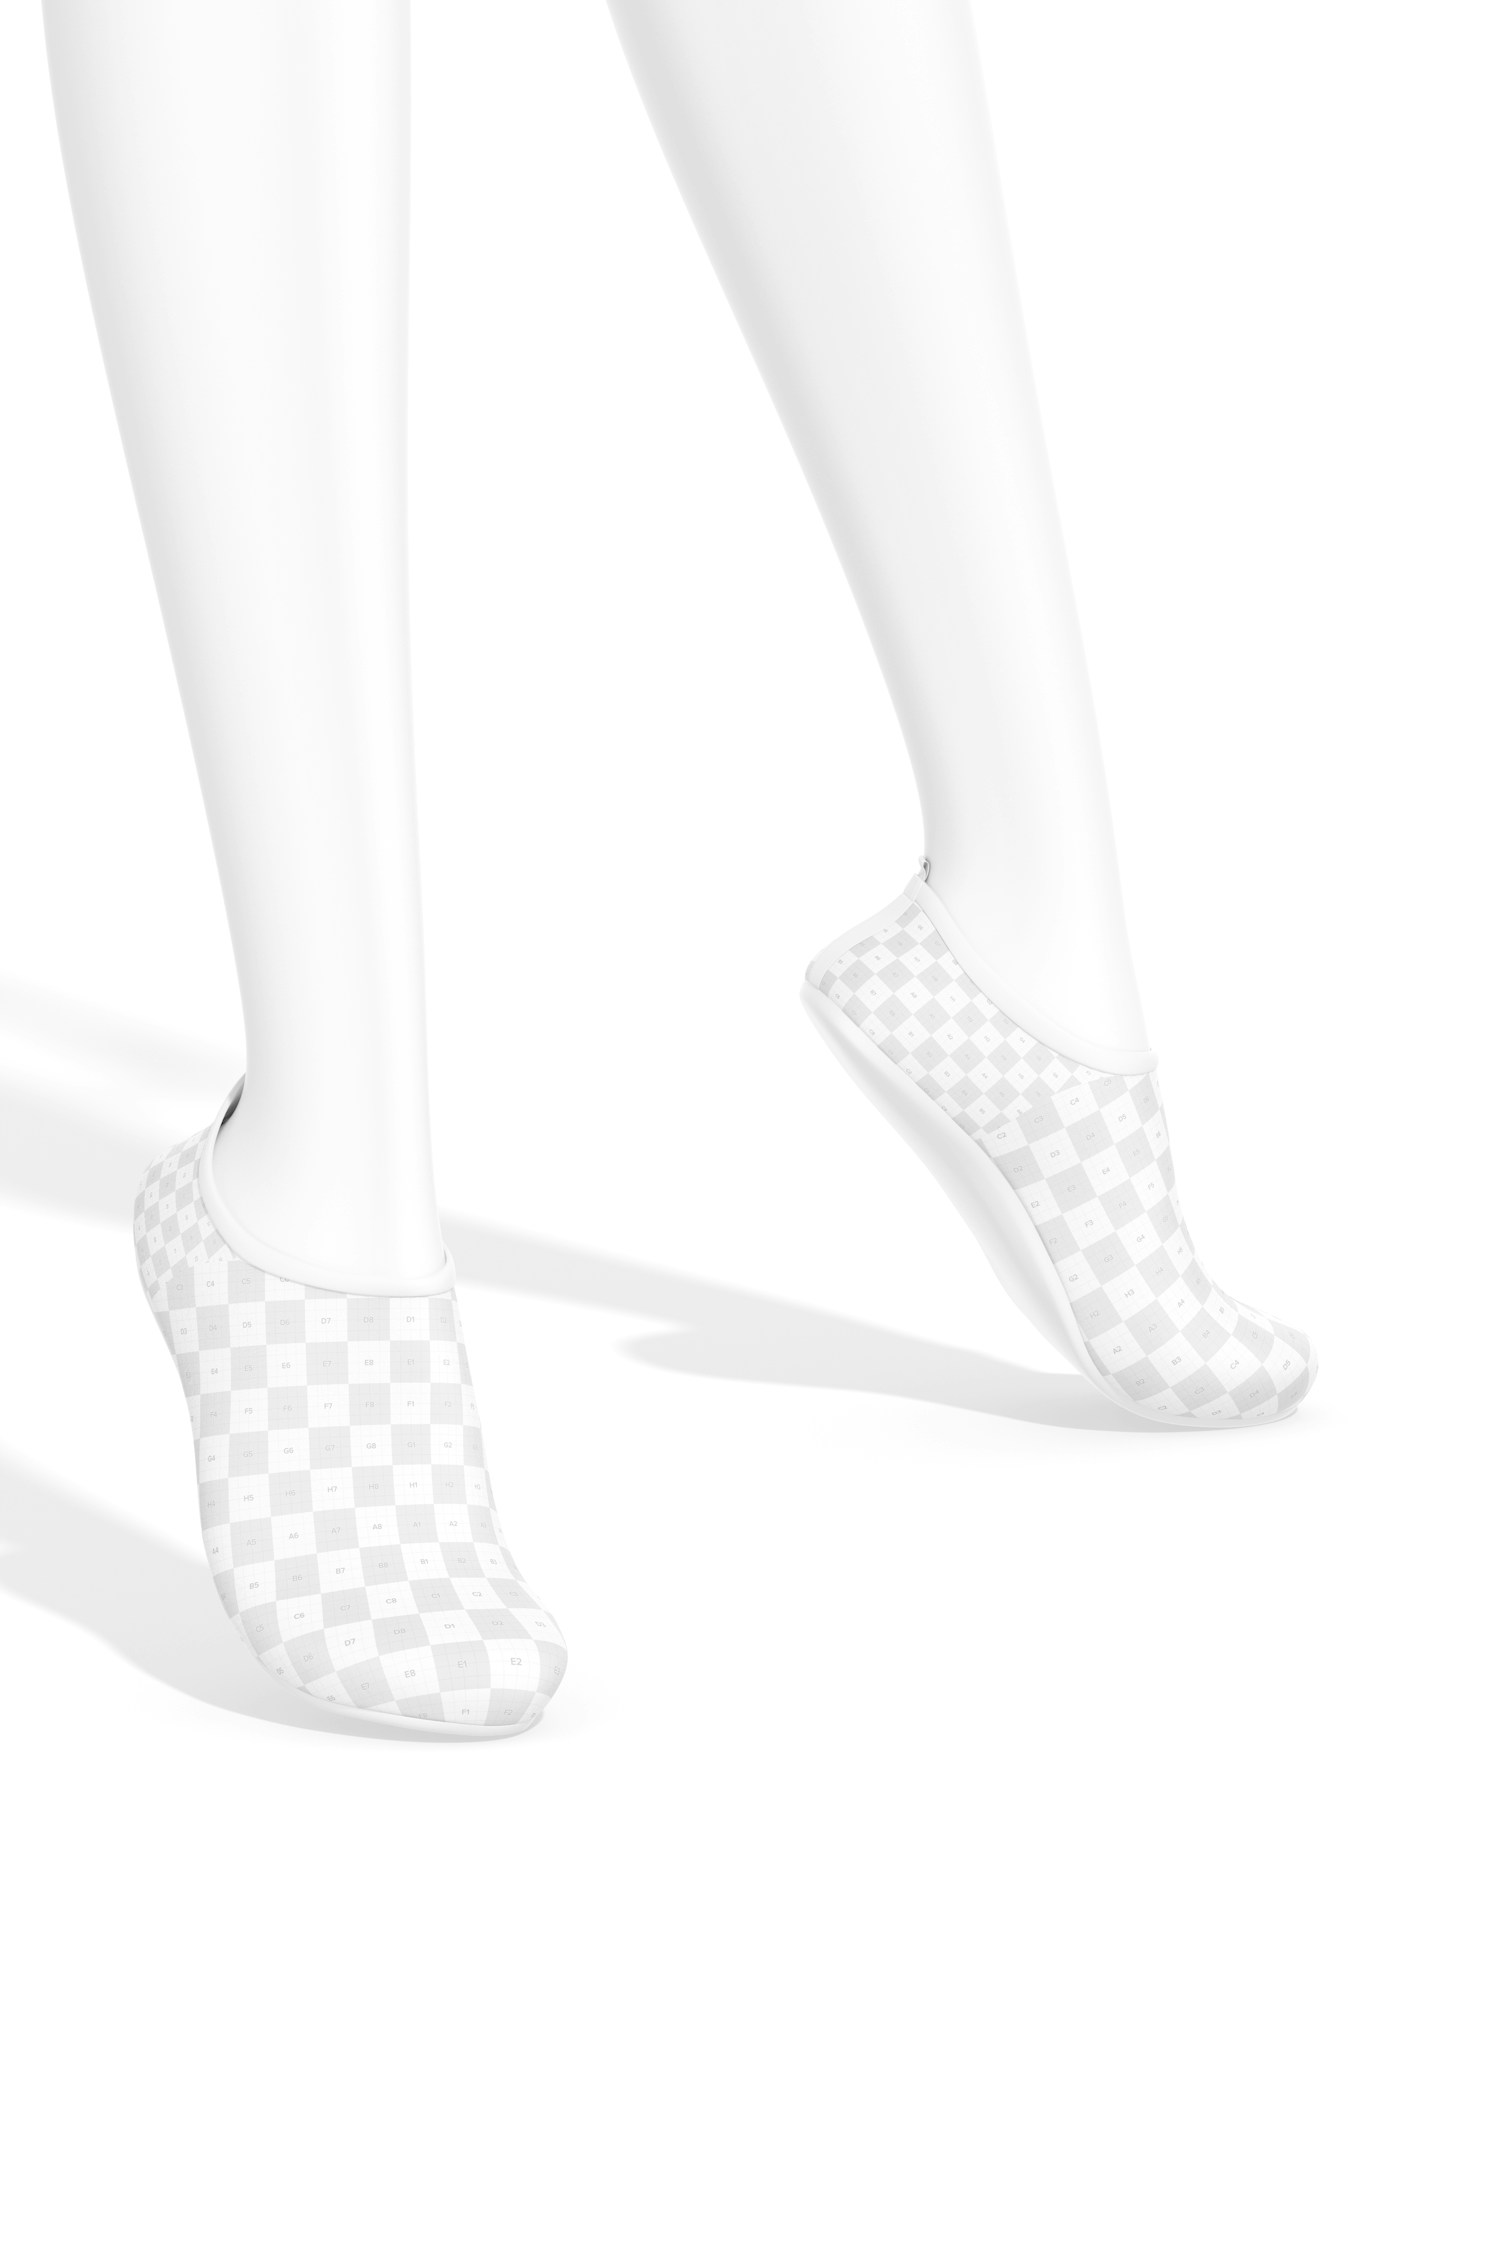 Water Shoes Mockup, on Mannequin